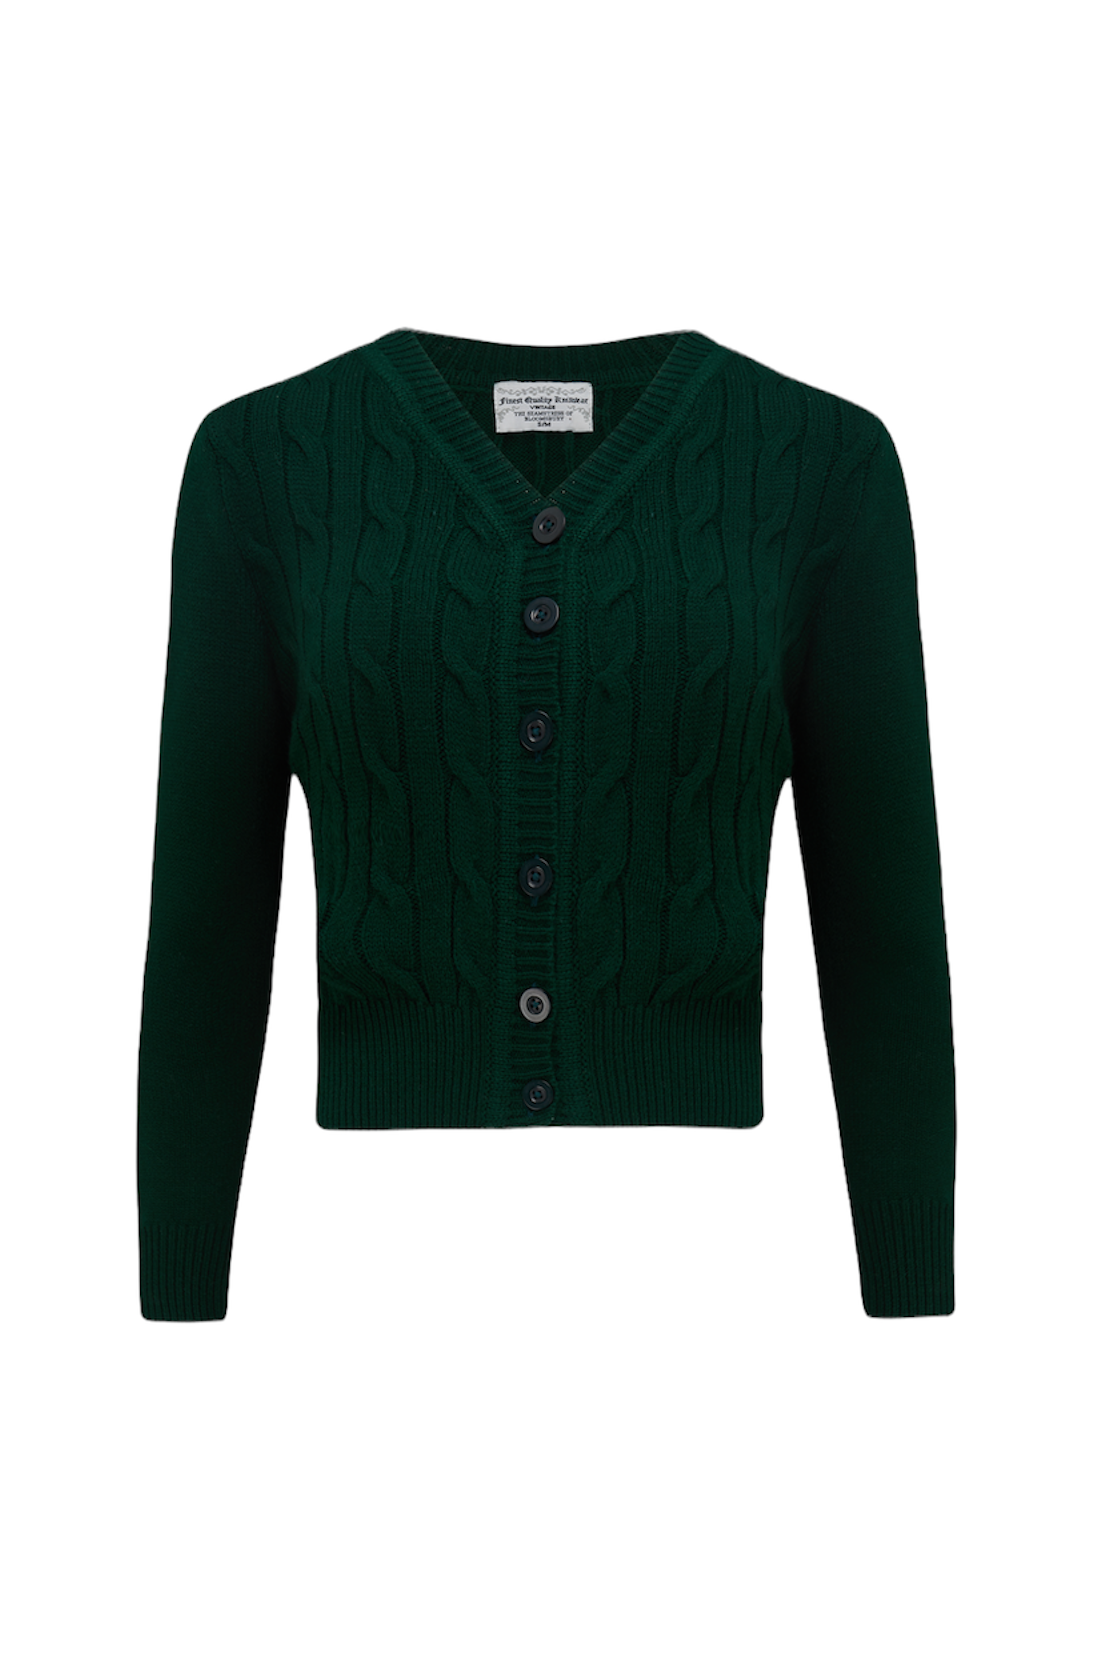 The Seamstress of Bloomsbury Cable Knit Cardigan - Green-The Seamstress of Bloomsbury-Sophies.dk